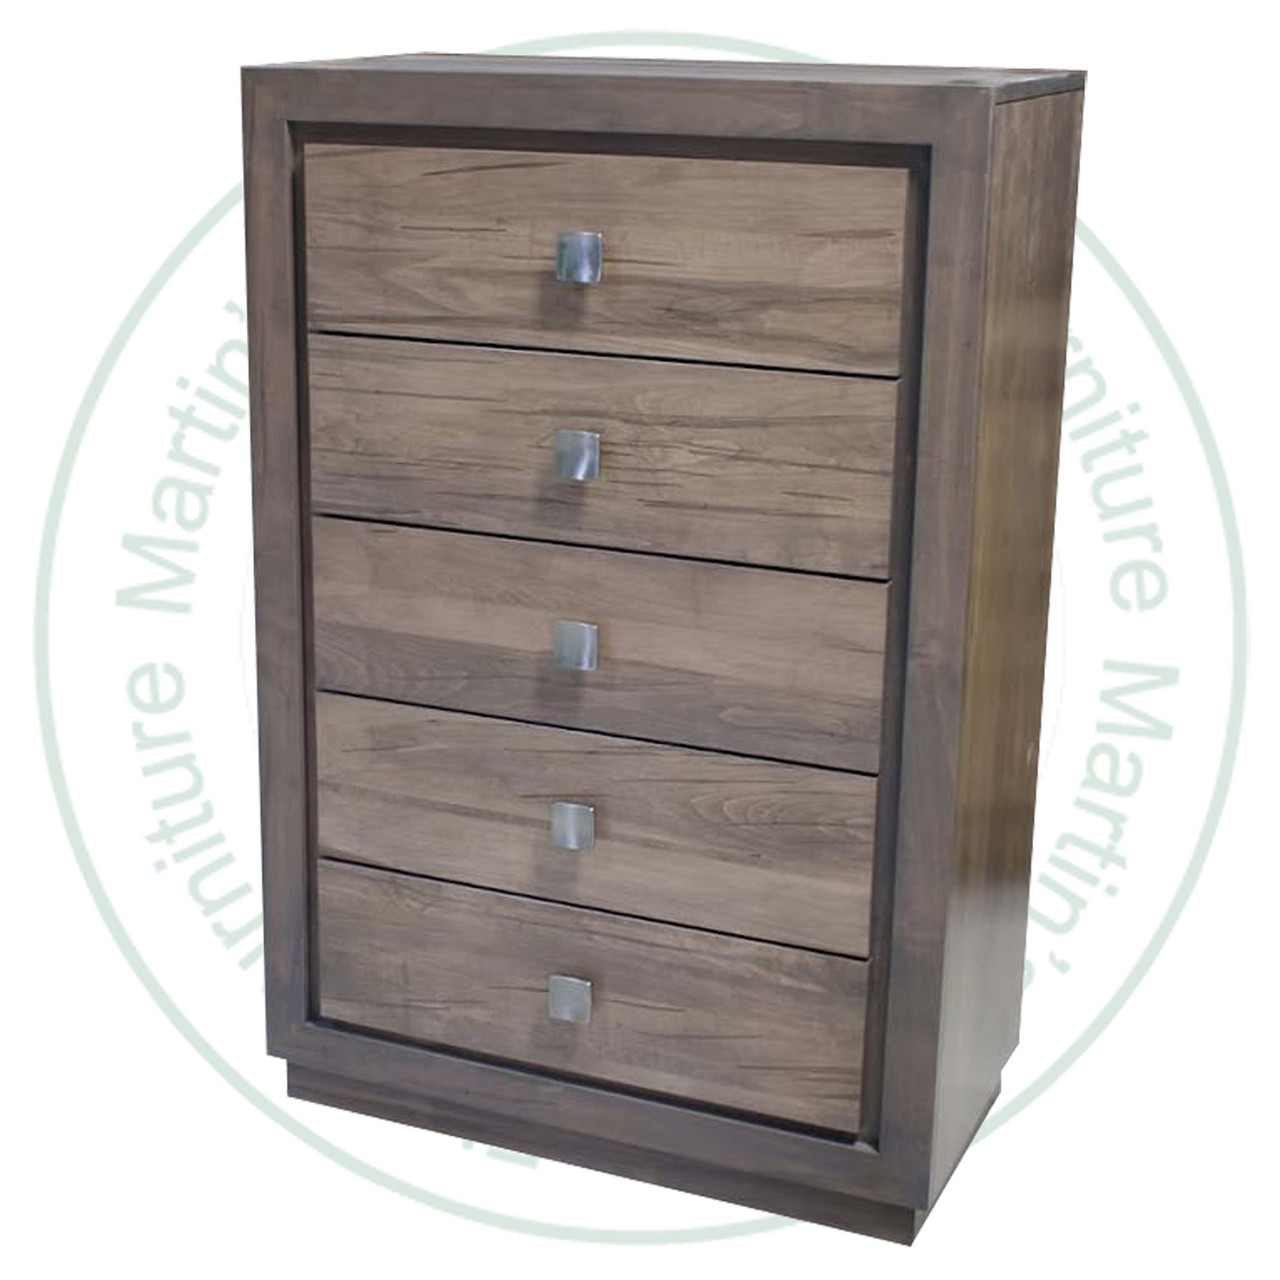 Oak Thornloe Chest Of Drawers 19'' Deep x 36'' Wide x 54'' High